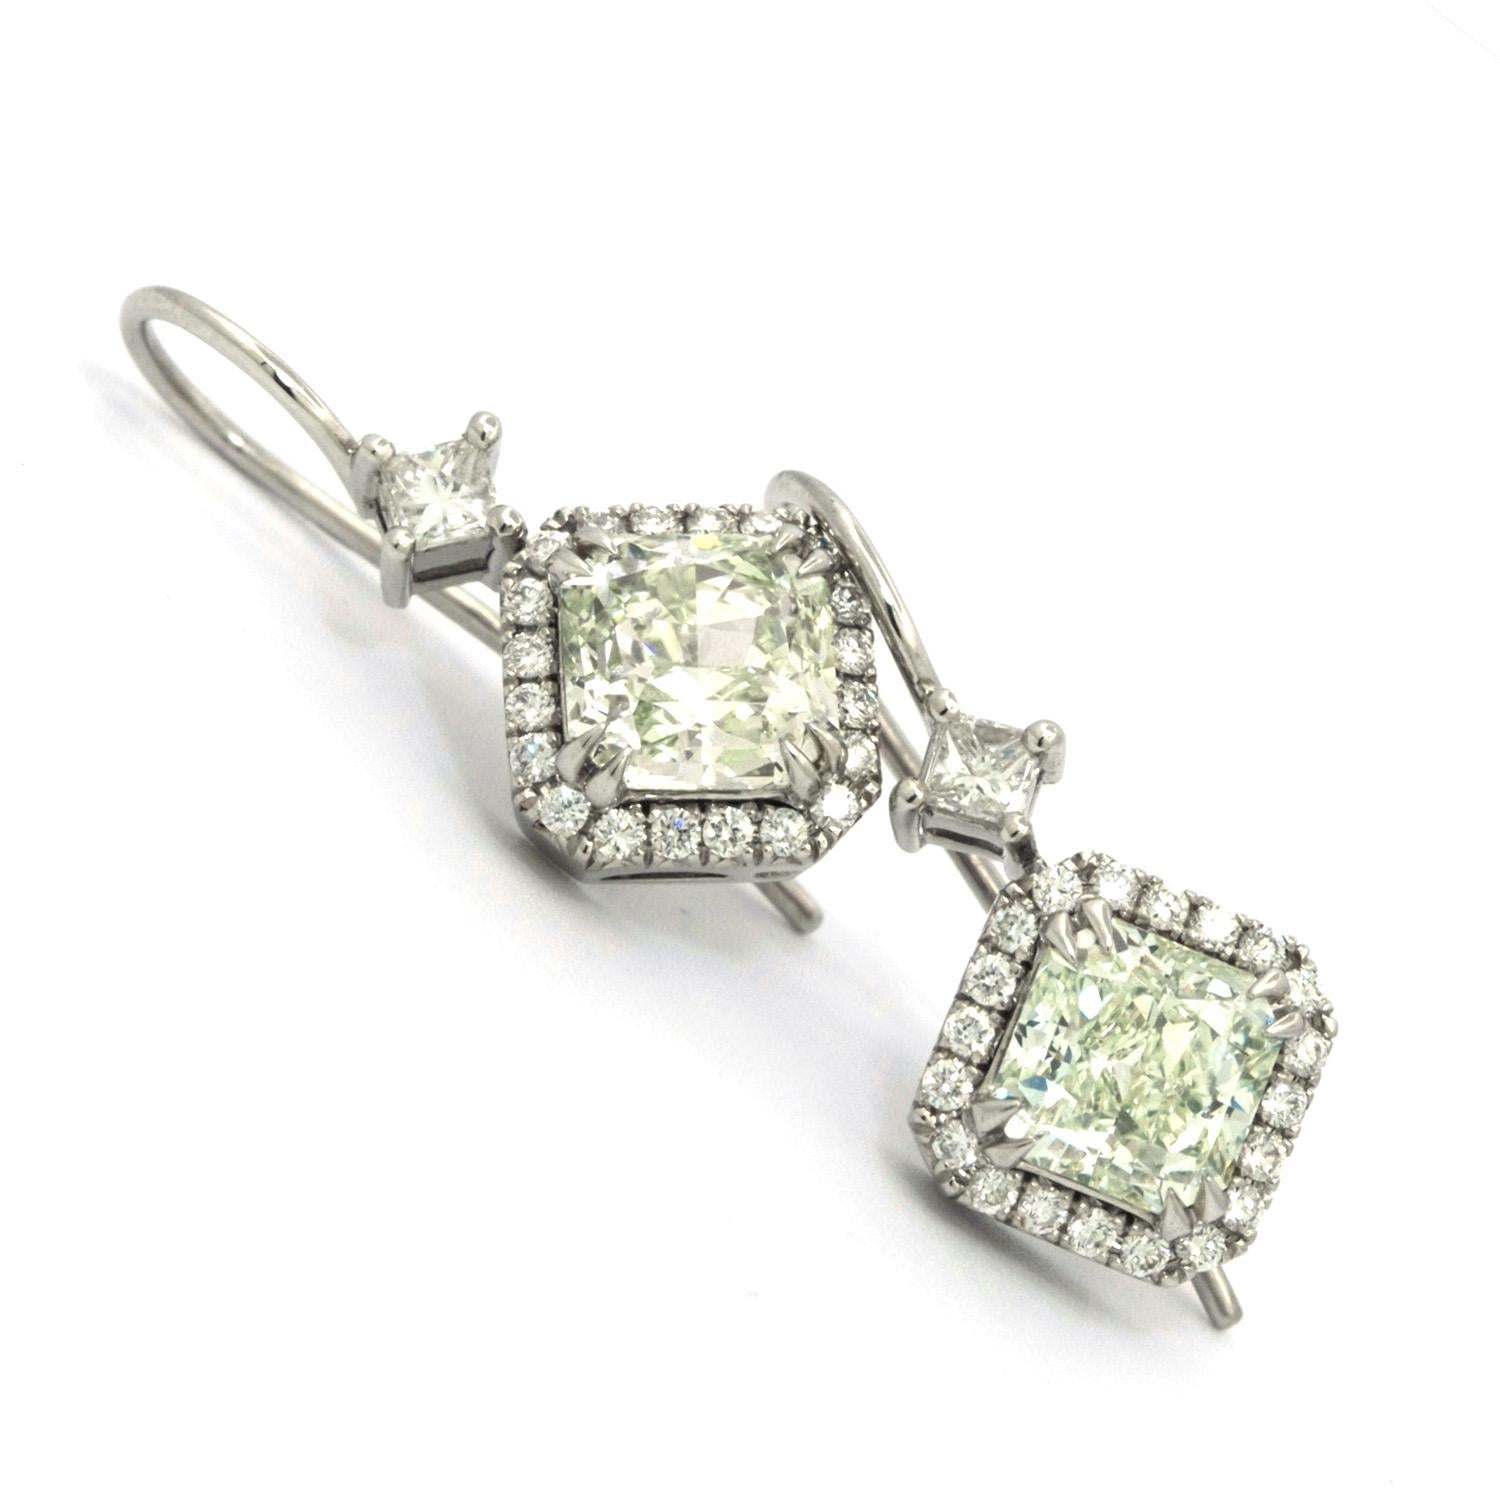 Two beautifully matching Radiant cut Green Diamonds, GIA certified.
One is a 1.26ct Radiant Light Yellow-Green VVS2, the other a 1.51ct Radiant Light Green SI1 Diamond, mounted along 0.40 carats of white Pave Diamonds and topped with a princess cut